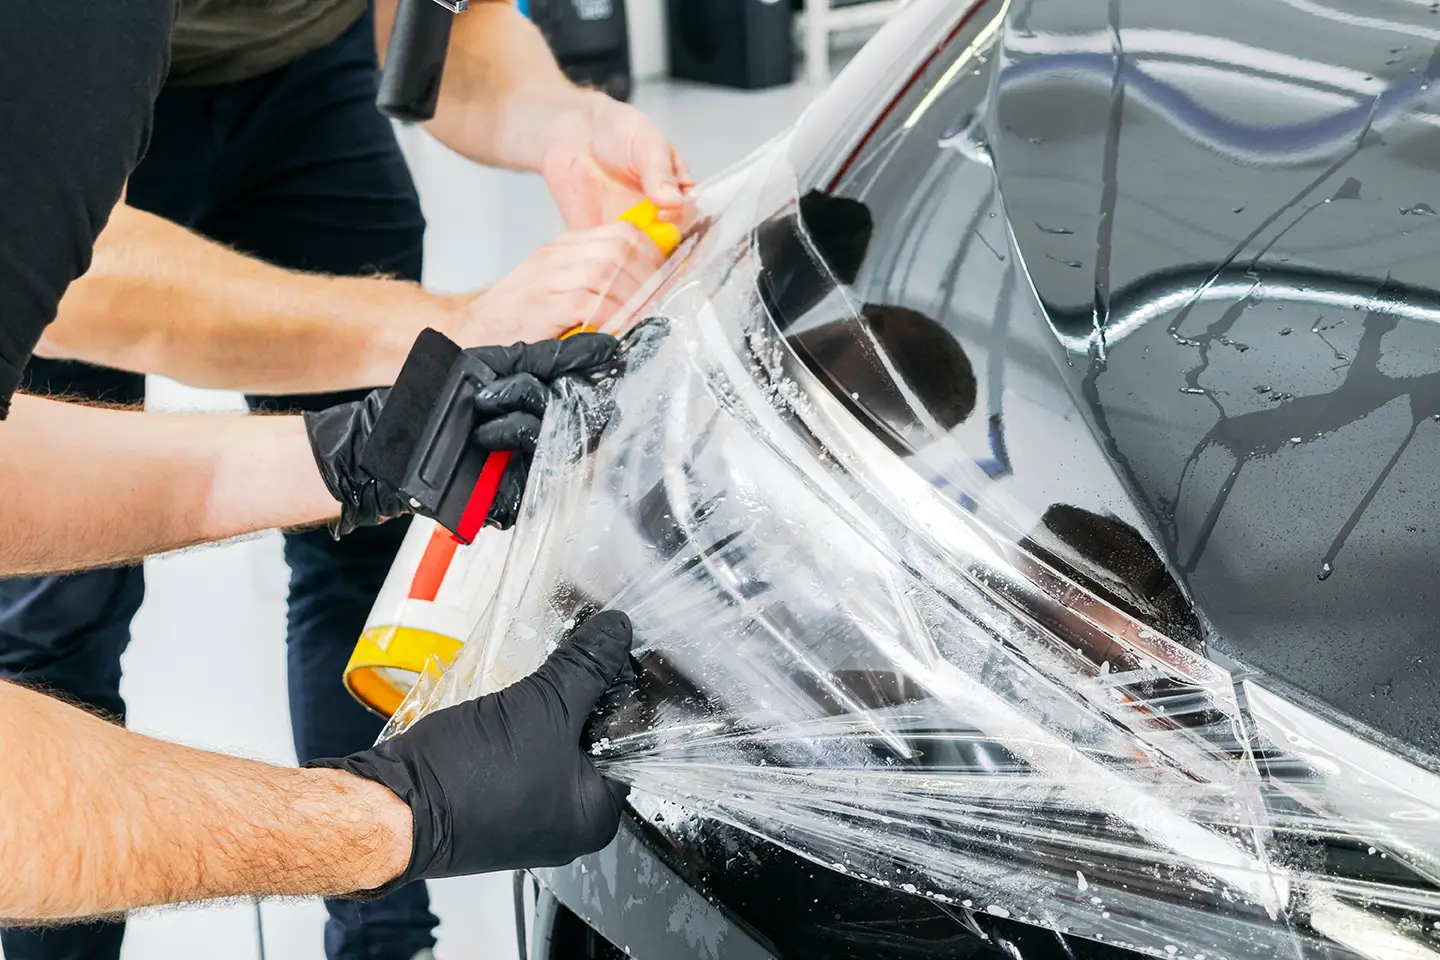 Car paint protective film being applied